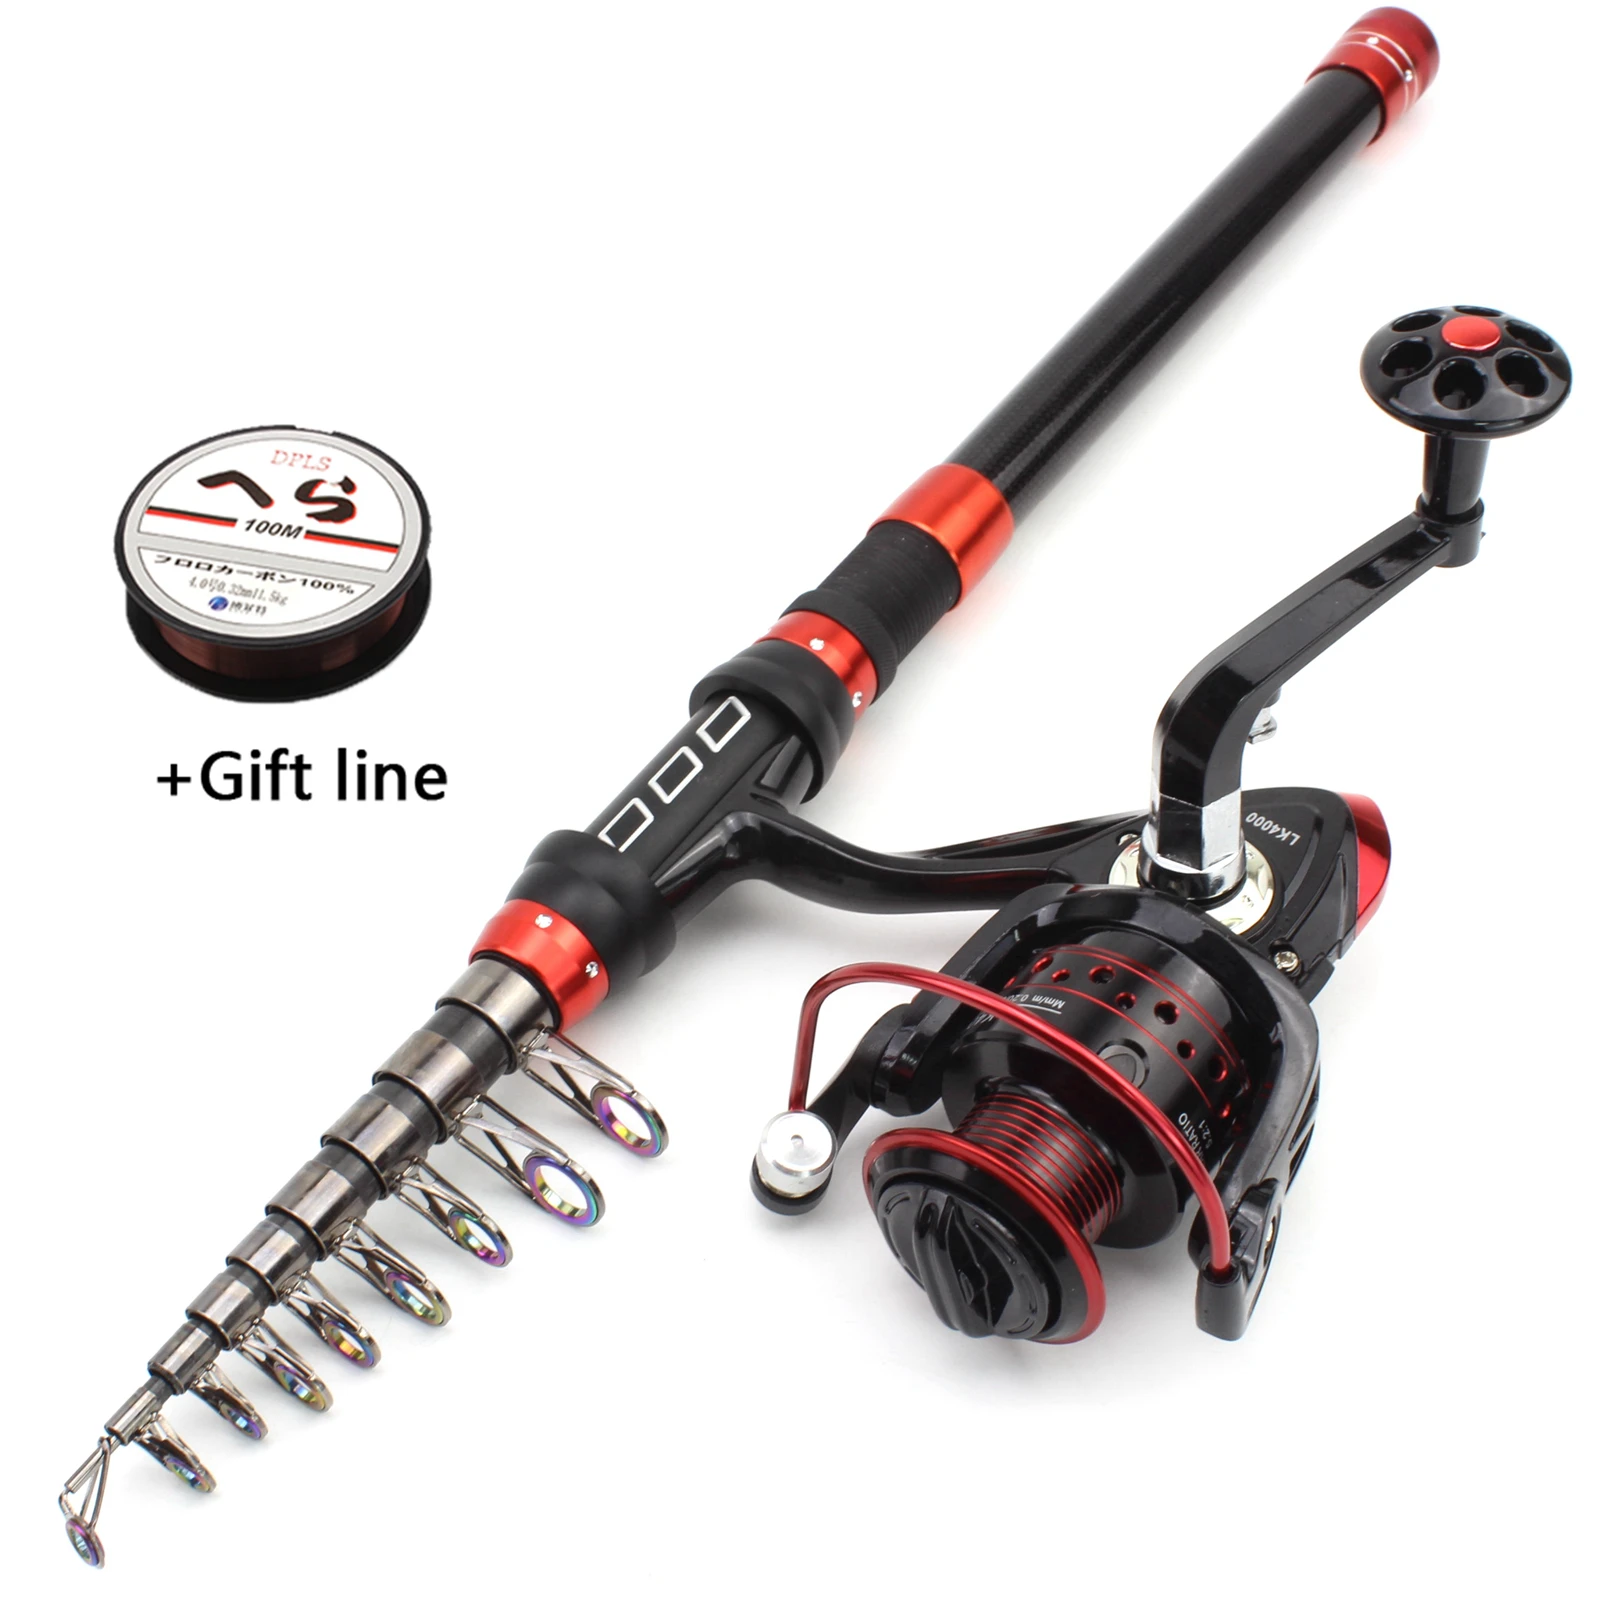 https://ae01.alicdn.com/kf/H6e6cba3dd36b4570a8002f158912ae14g/1-8m-3-0m-Rod-Reel-Combos-Carbon-Spinning-Fishing-Rod-and-Reel-set-Portable-rod.jpg